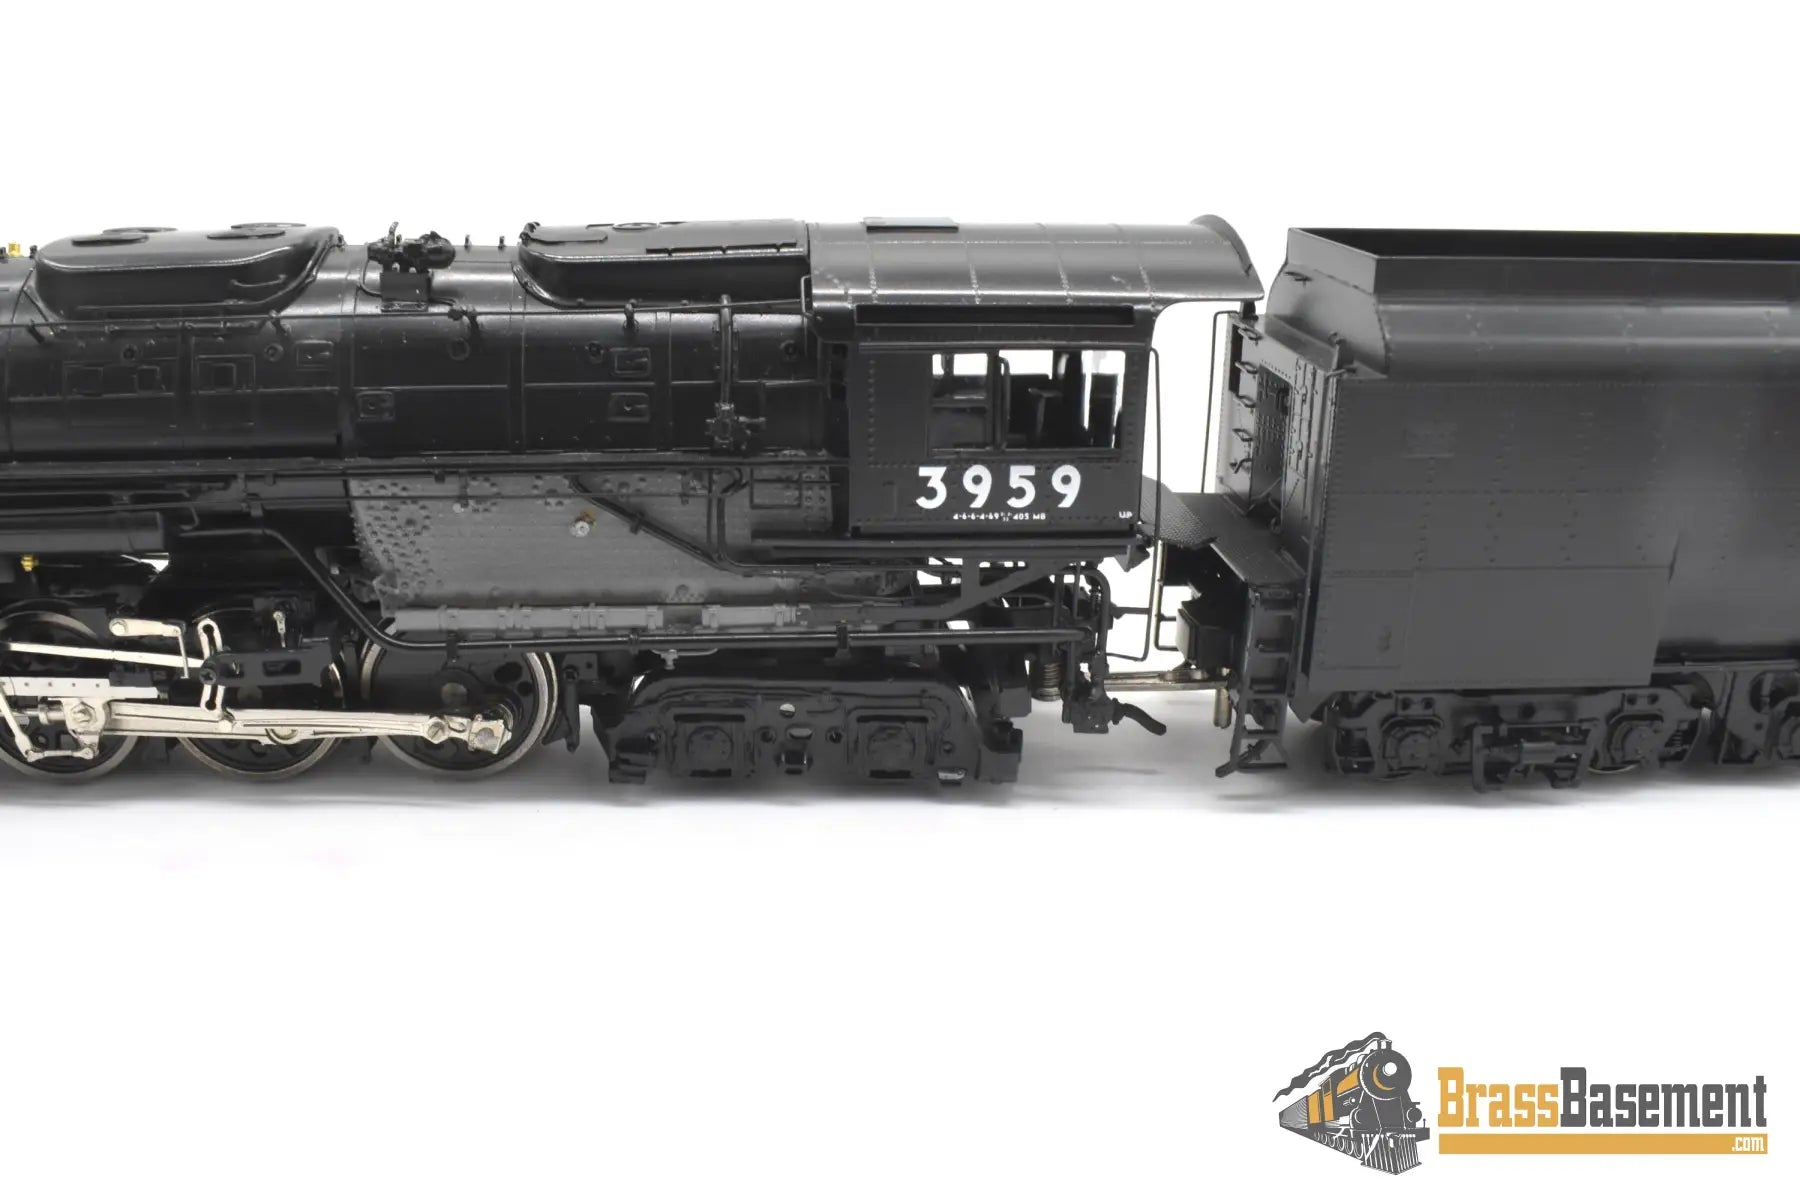 Ho Brass - Overland Omi 1593.1 Union Pacific Challenger 4 - 6 - 6 - 4. One Of 21!!! Steam